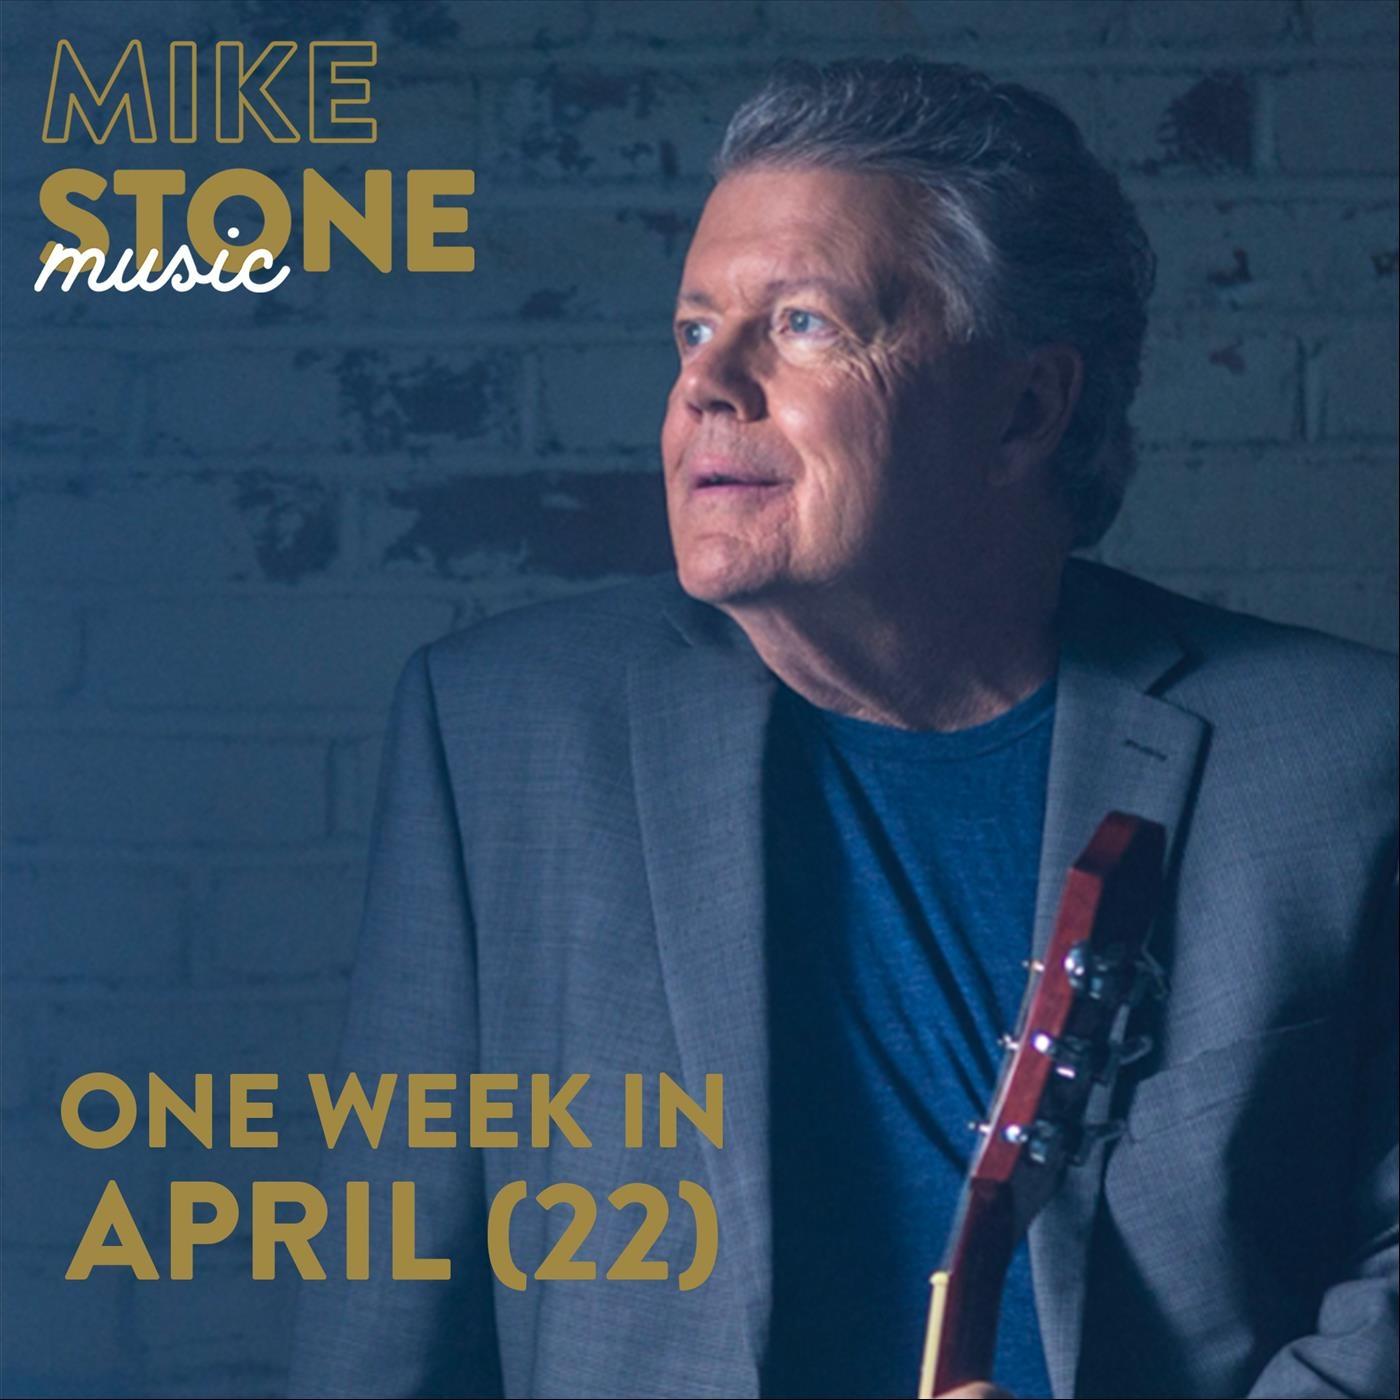 Mike Stone - One Week in April (22)